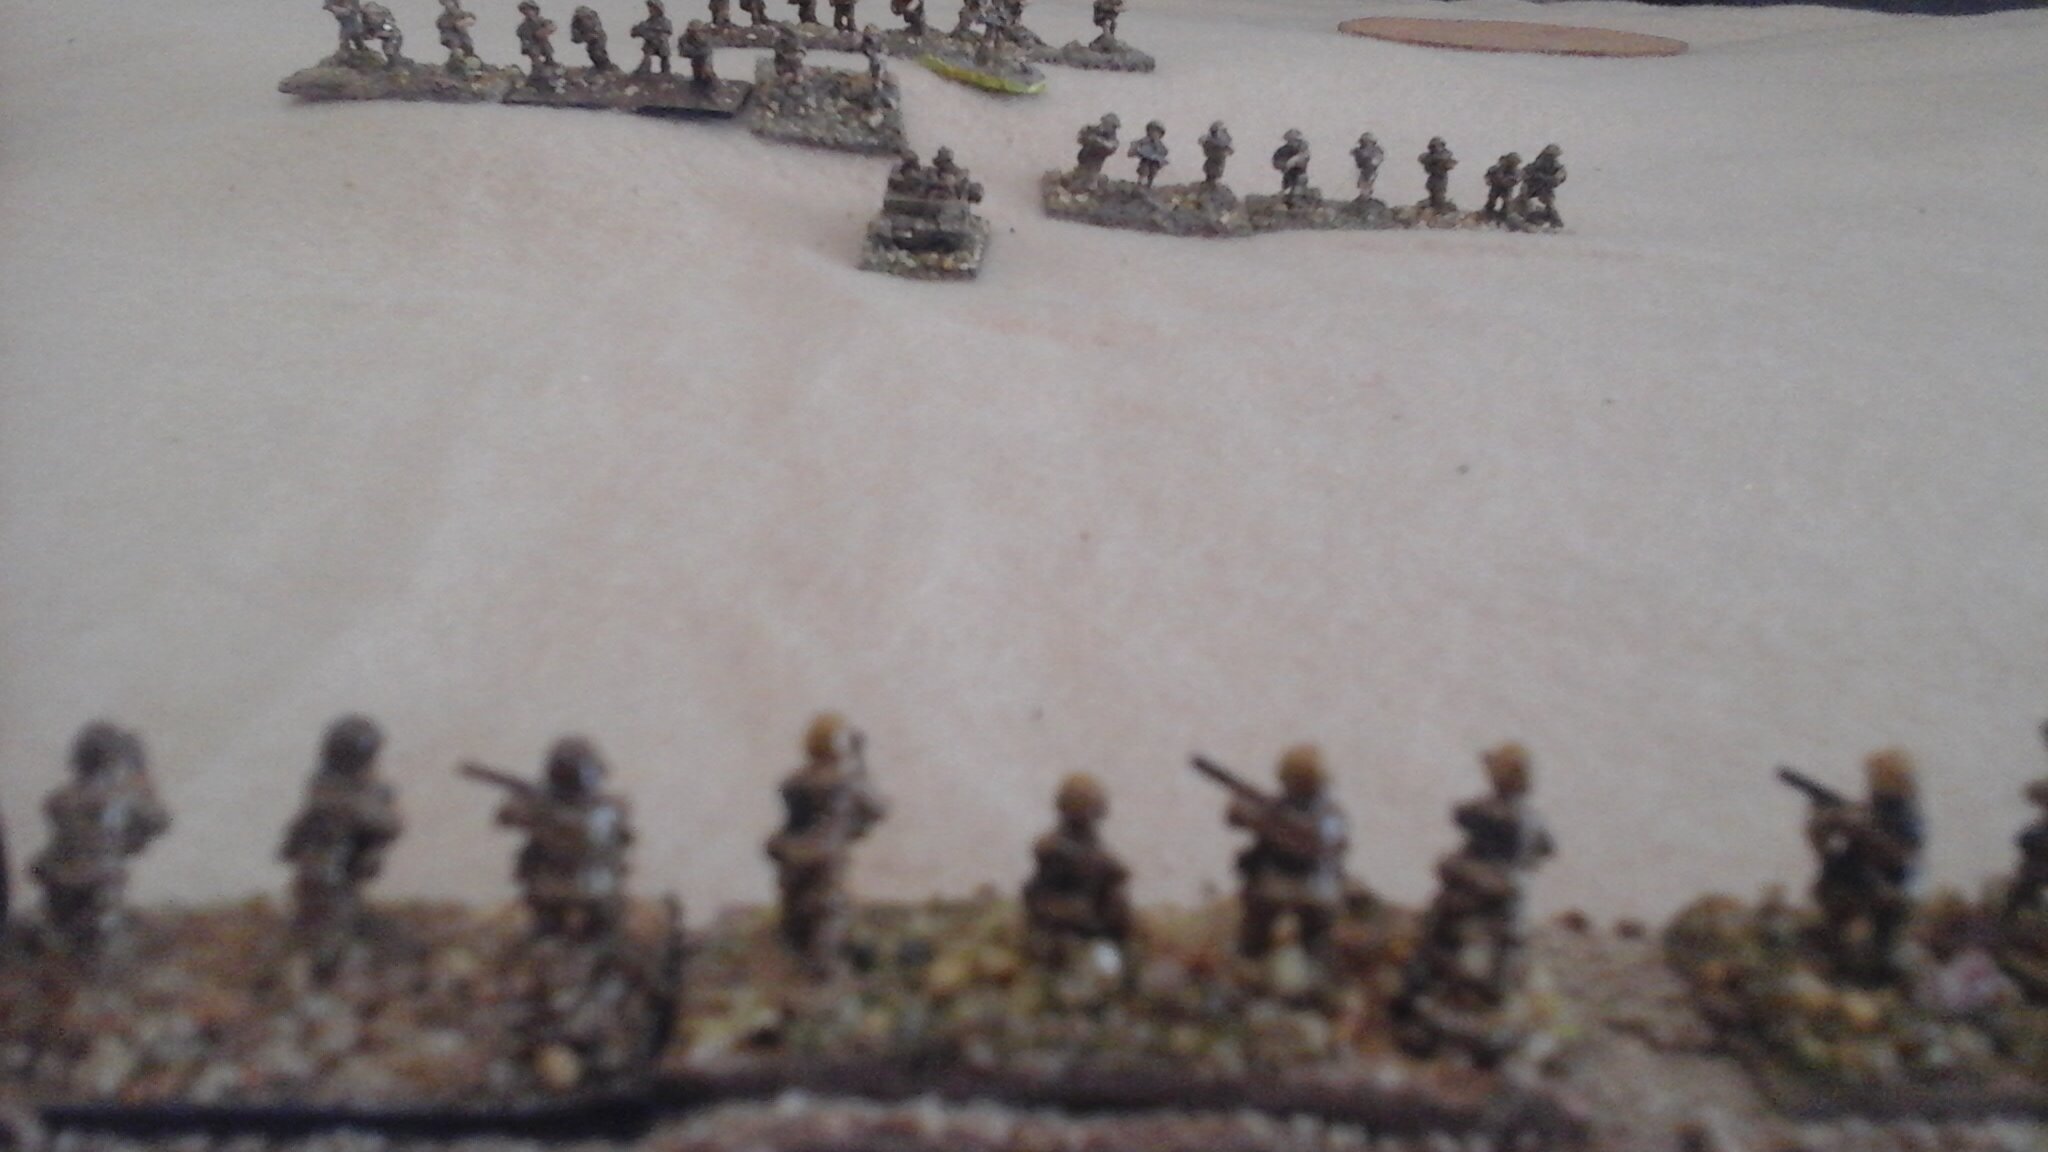 2/2 Australian come over the hill.  I drop the smoke from the mortars far too far behind the Italians making it pointless.